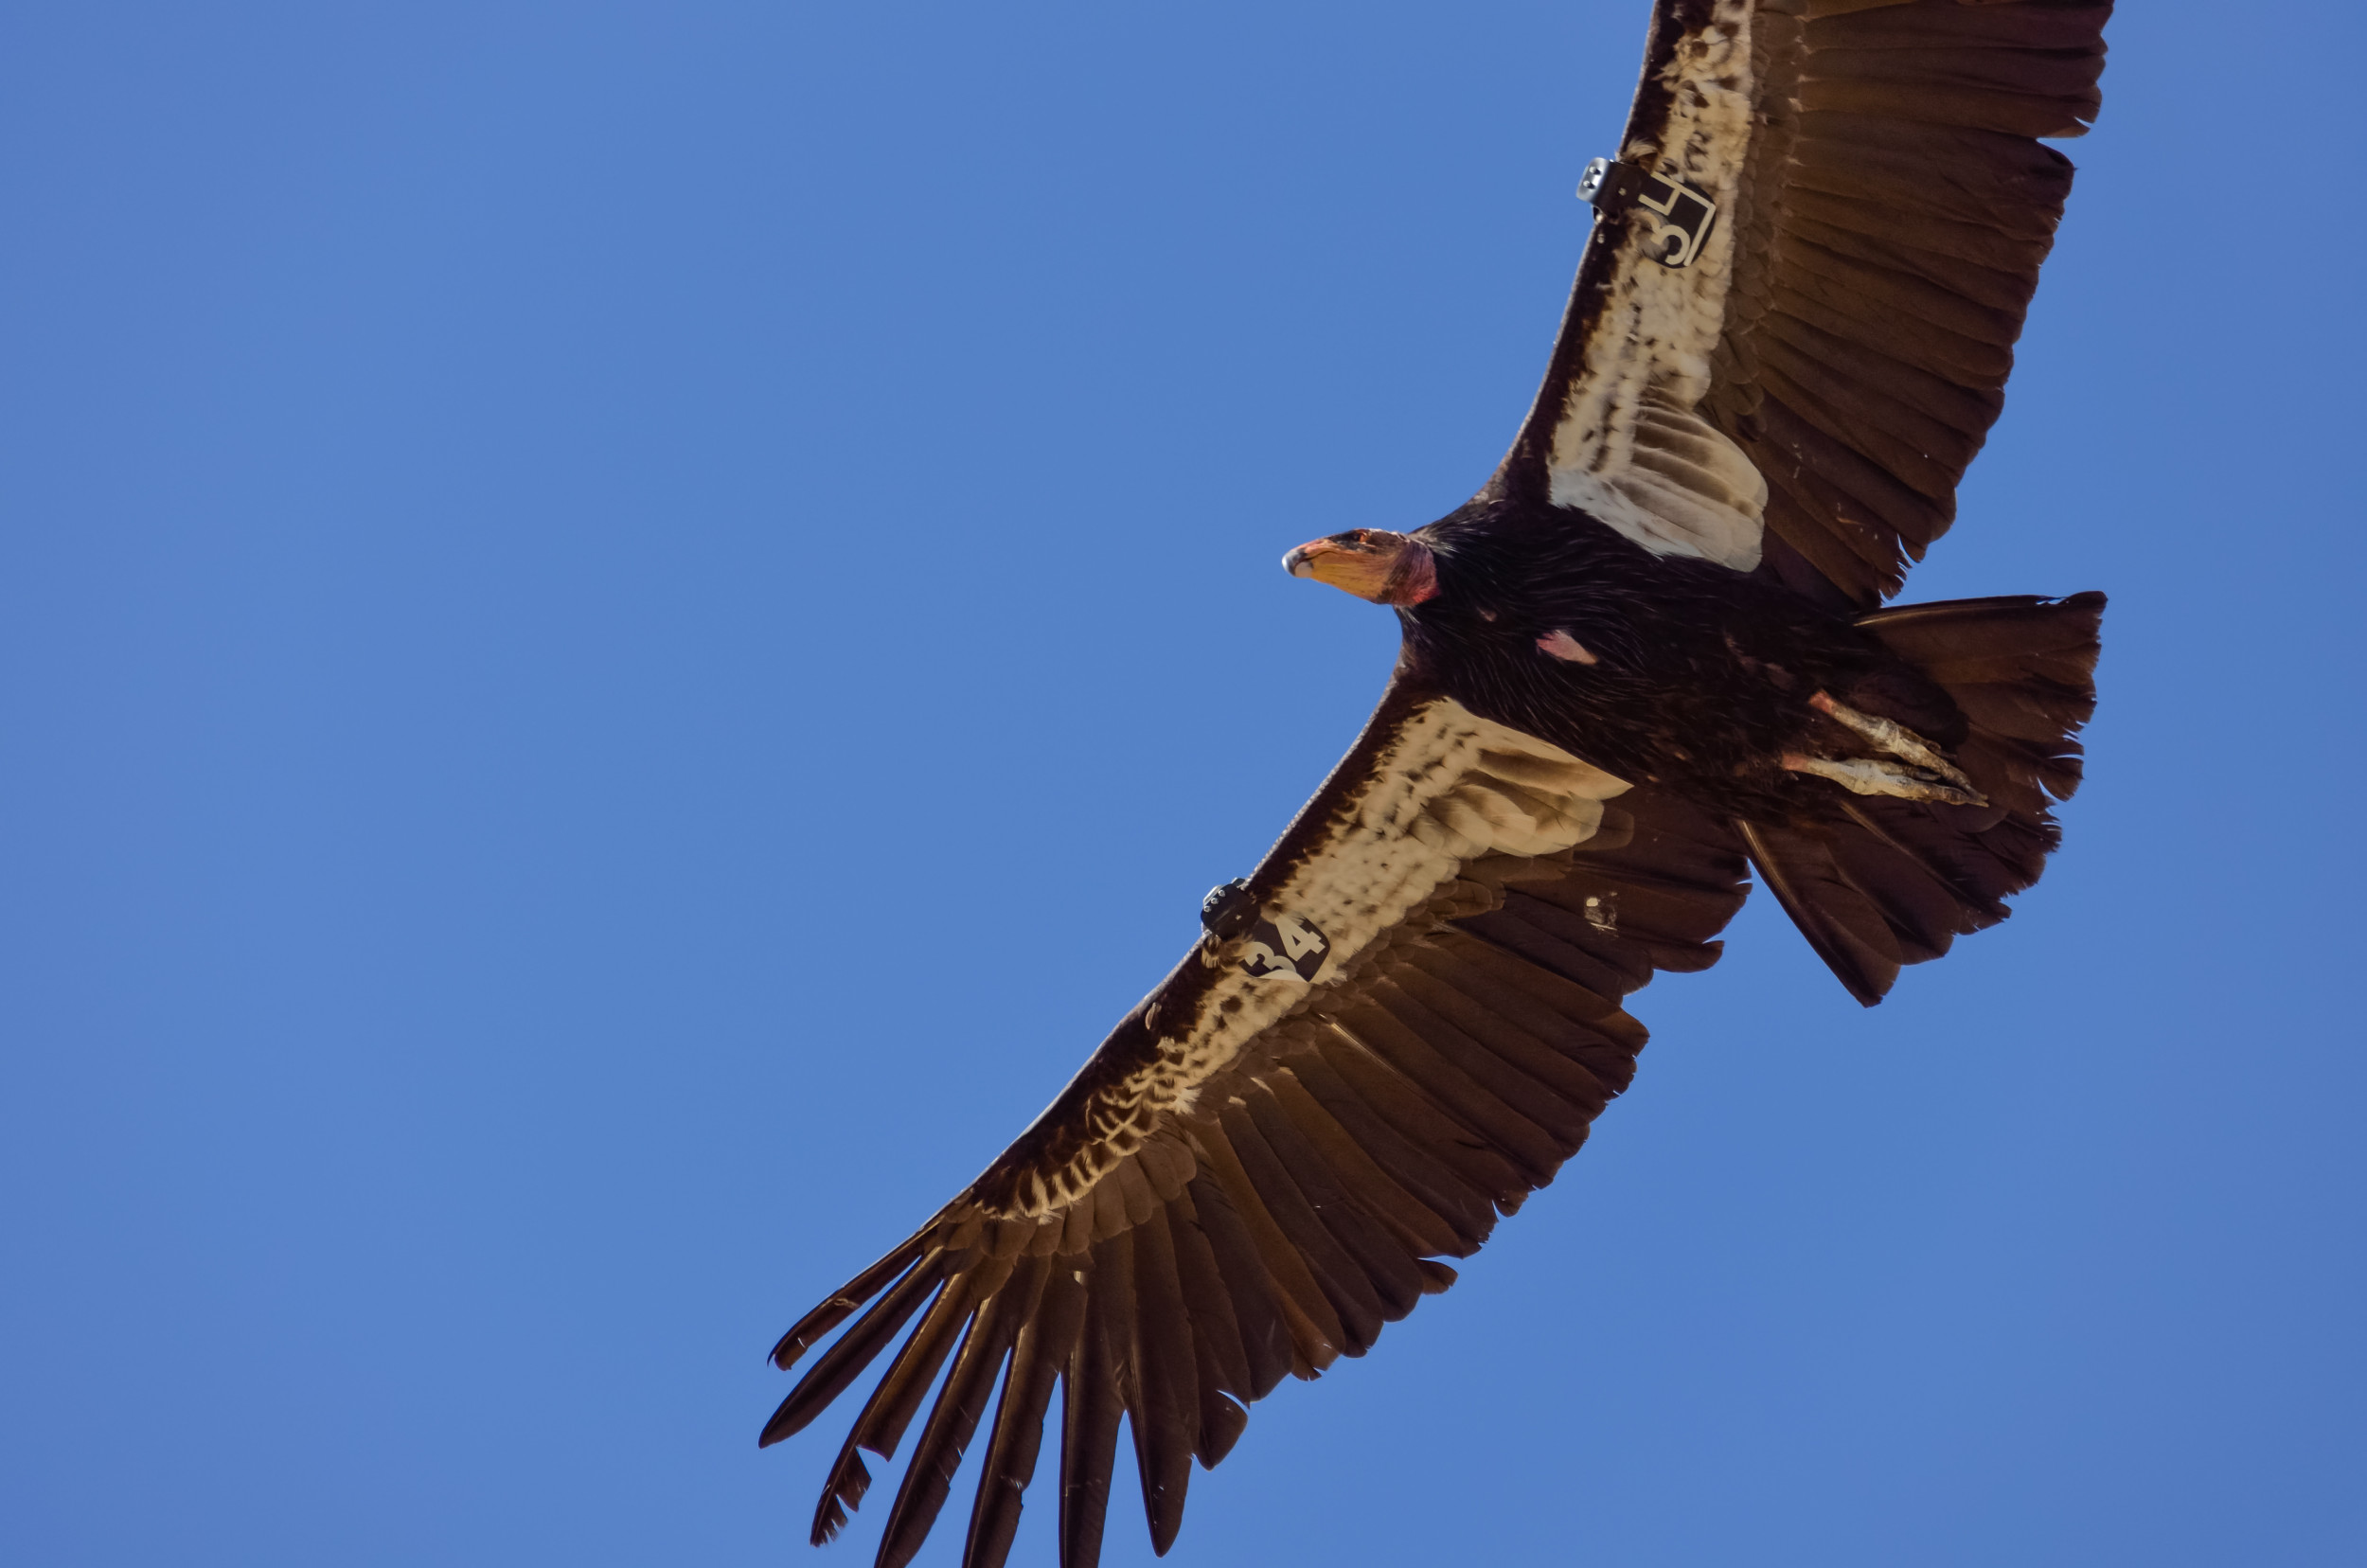 Reward Offered to Find Who Killed Endangered California Condor